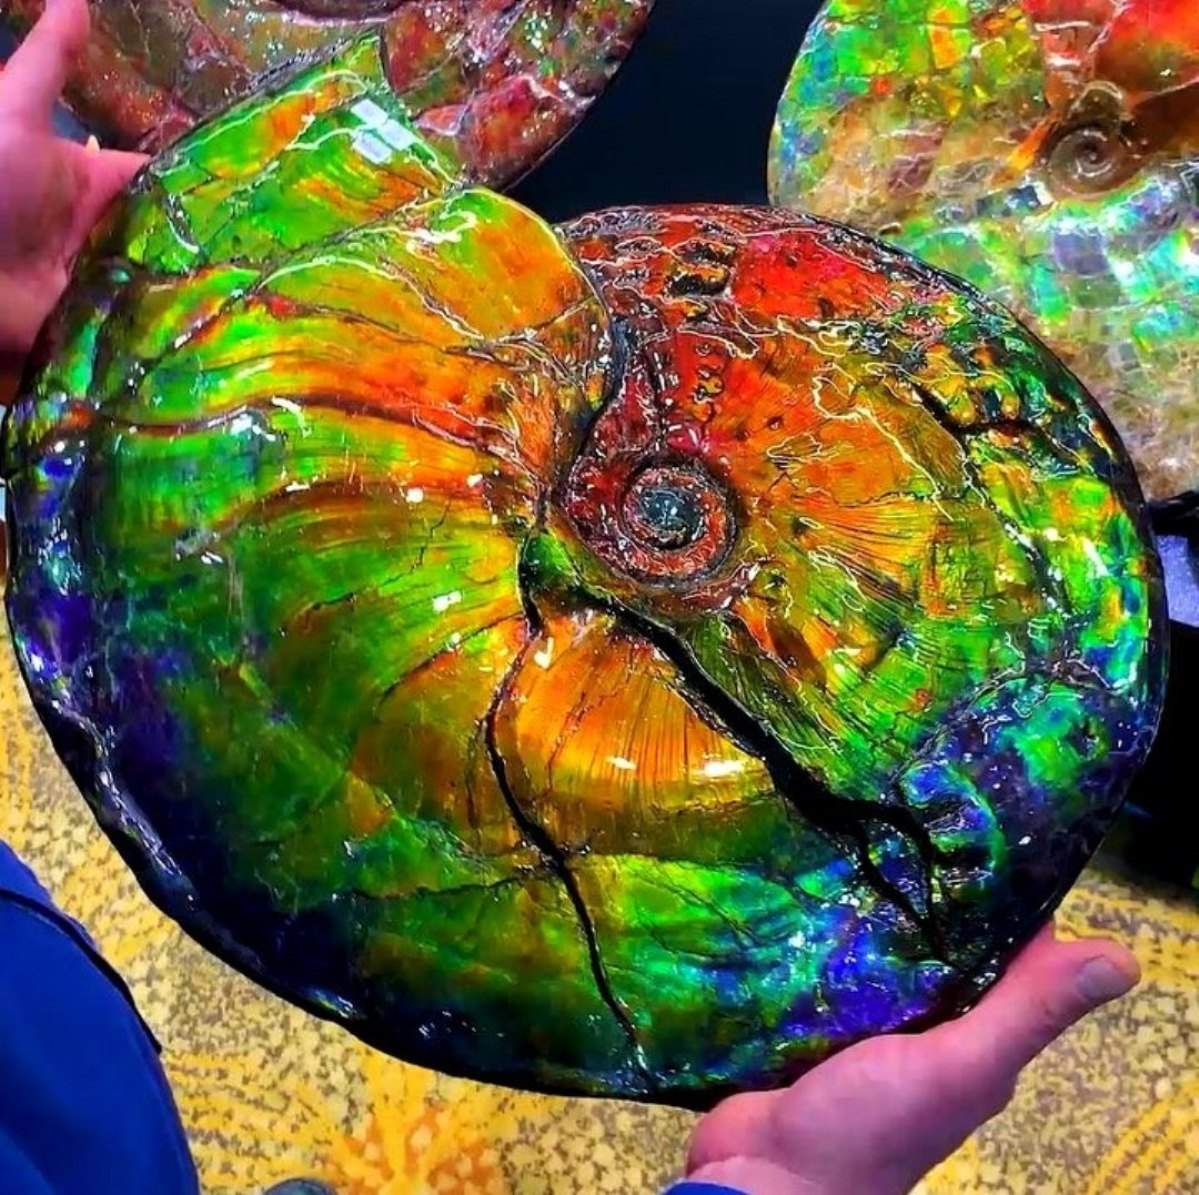 Ammolite: Gemstone with a Spectacular Flash of Iridescent Colors!